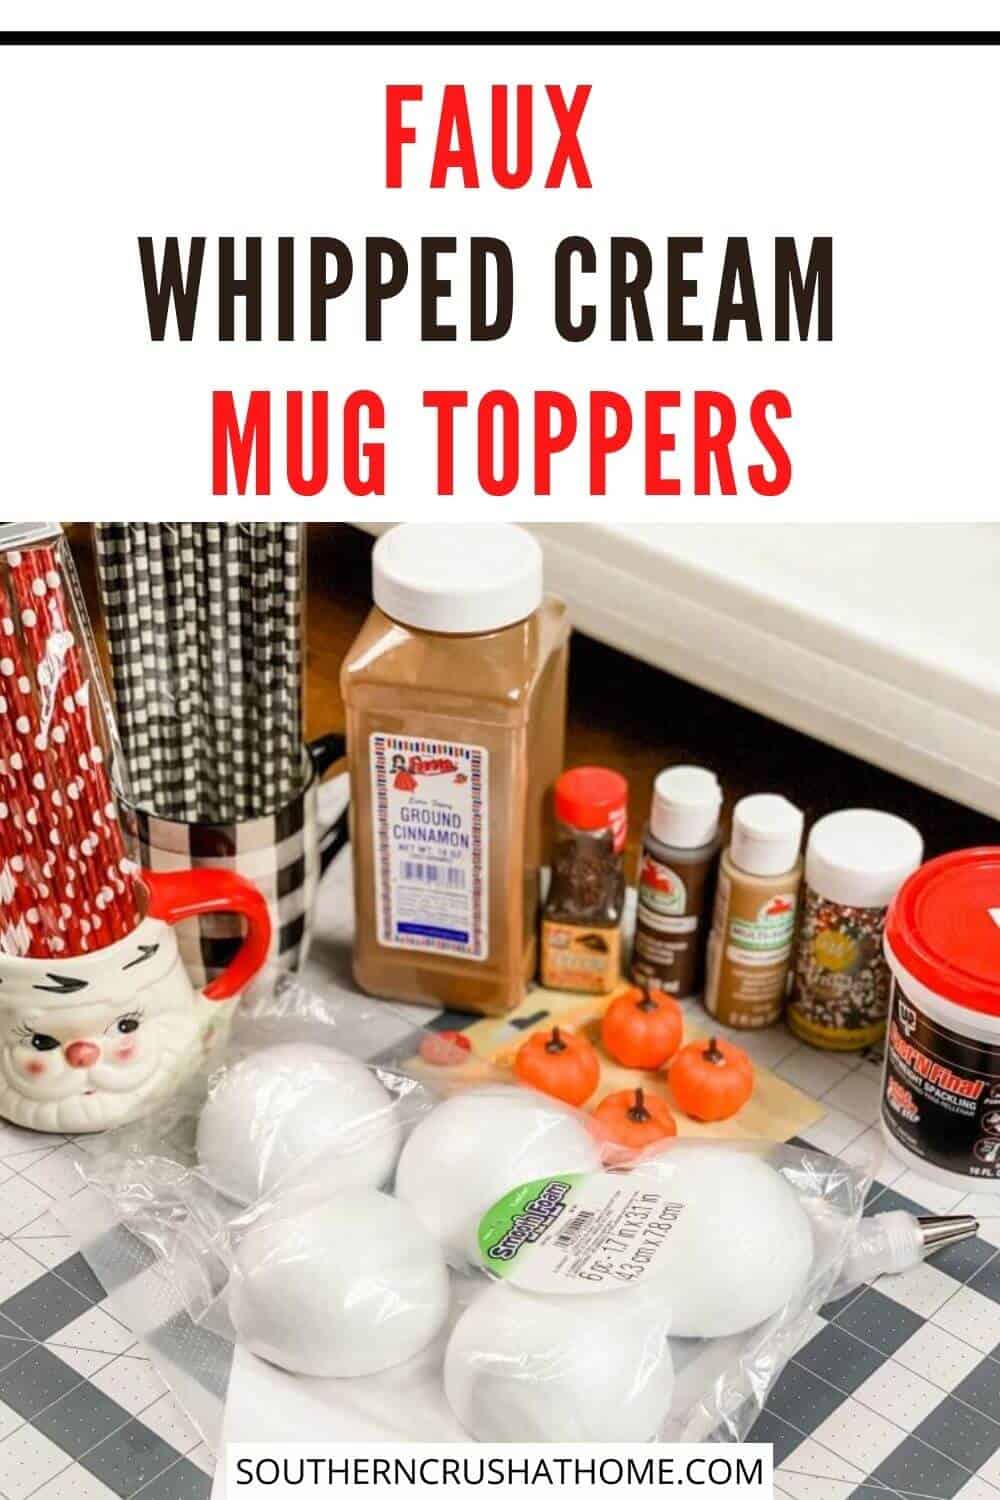 faux whipped cream mug topper pin image with text